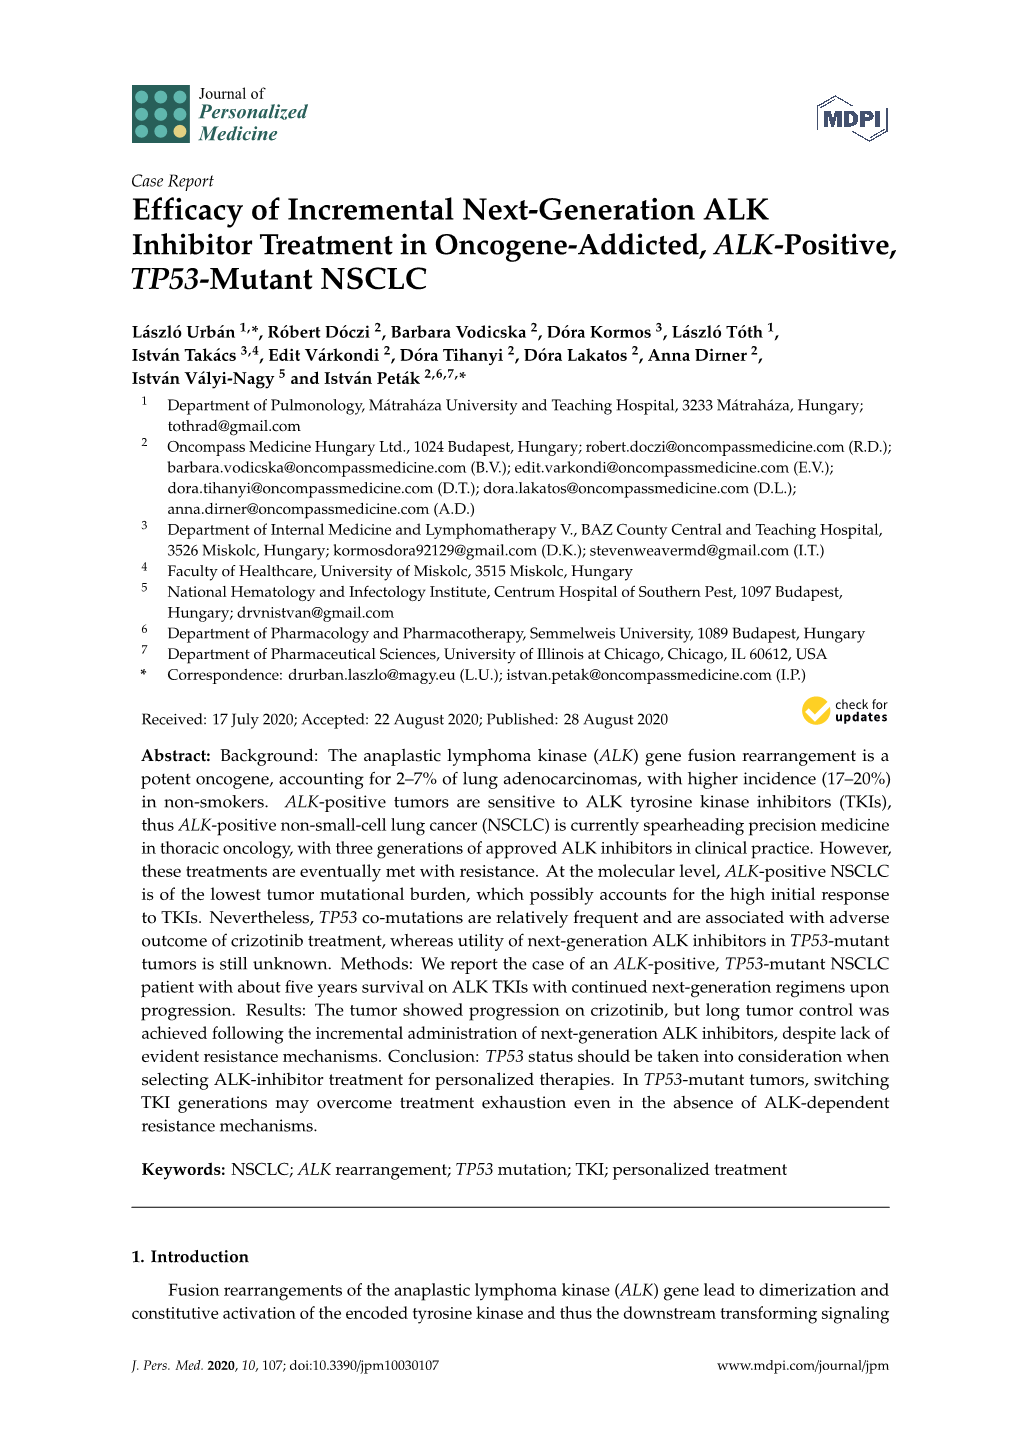 Inhibitor Treatment in Oncogene-Addicted, ALK-Positive, TP53-Mutant NSCLC